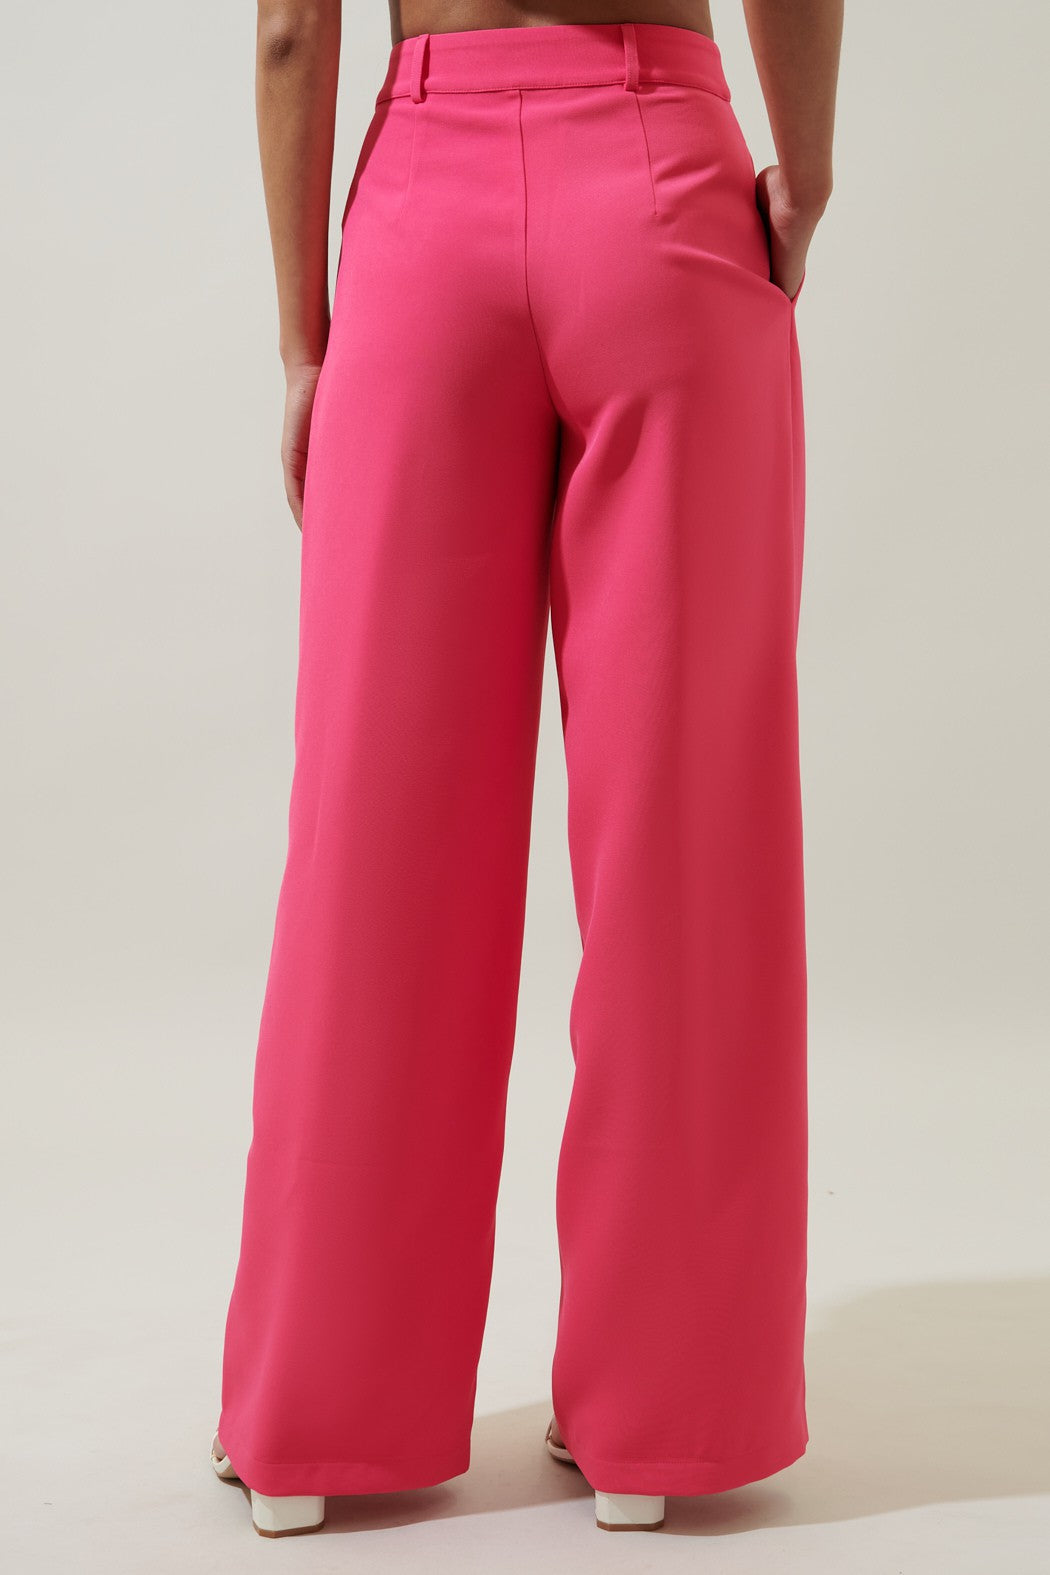 RICA SUAVE BELTED WIDE LEG TROUSERS - STP7276